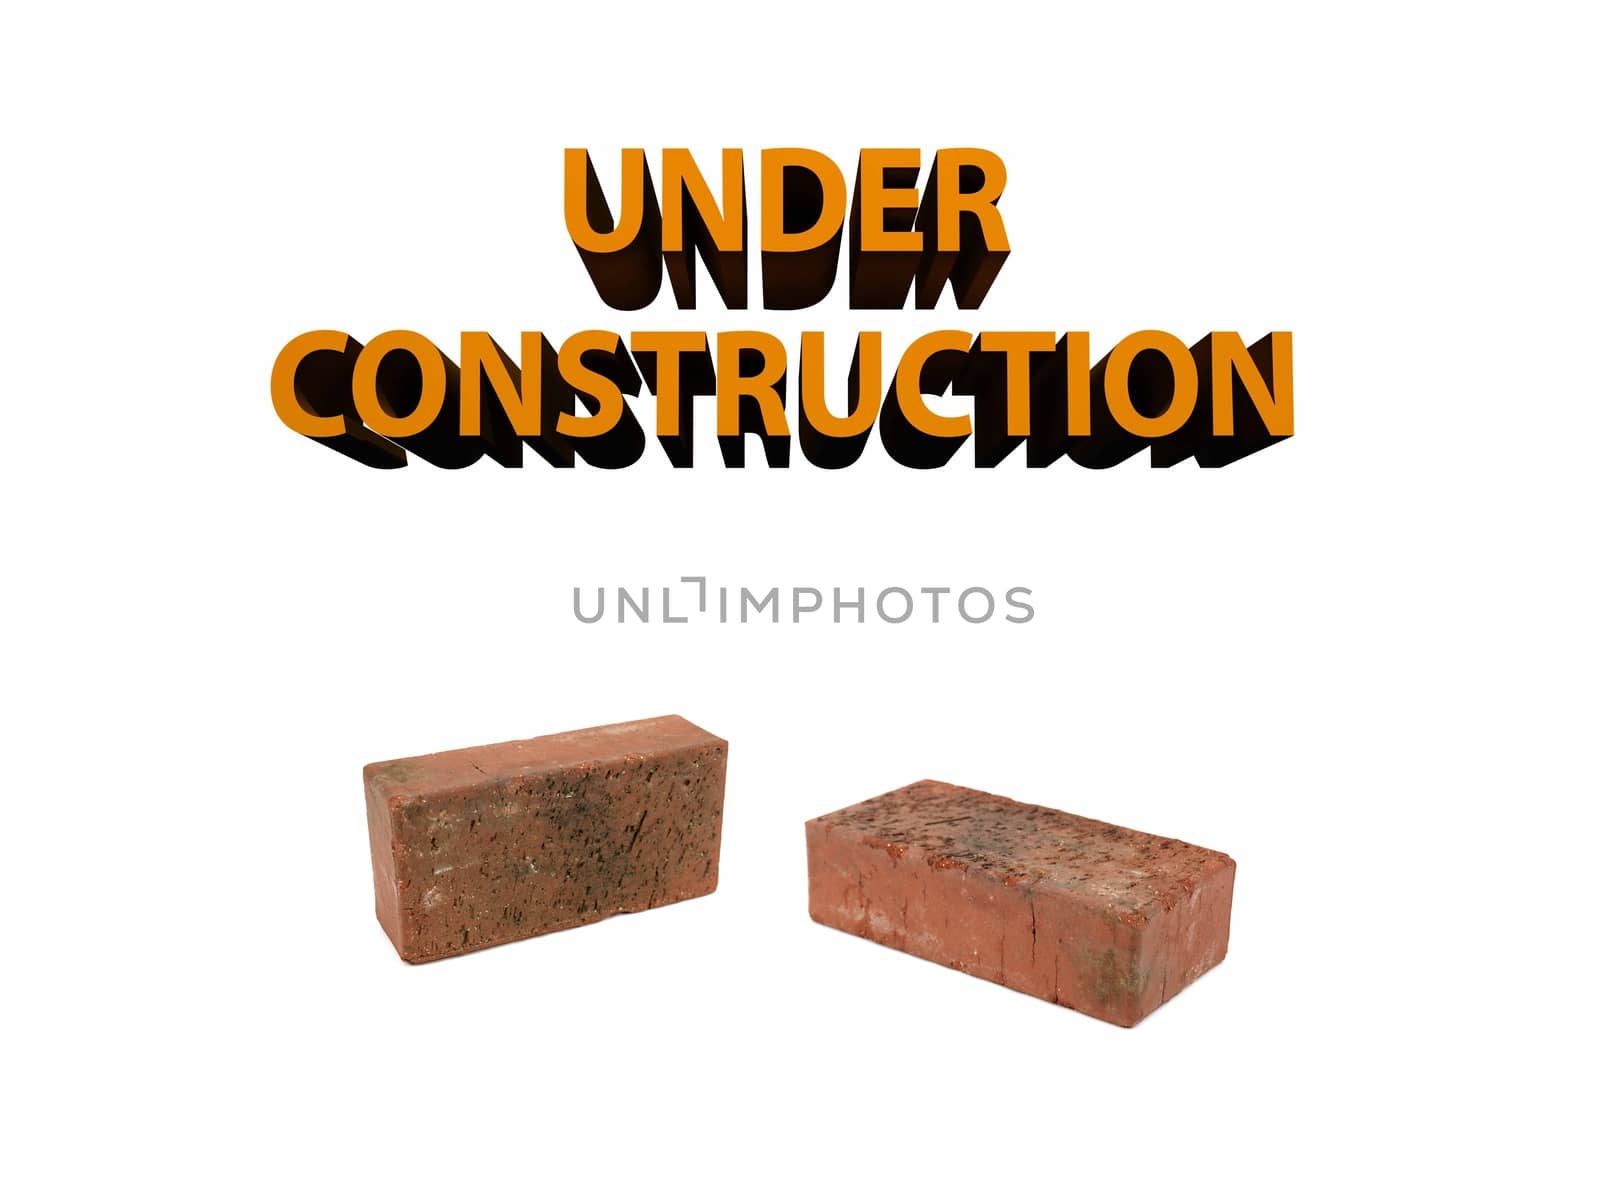 A conceptual maintanence and under construction image